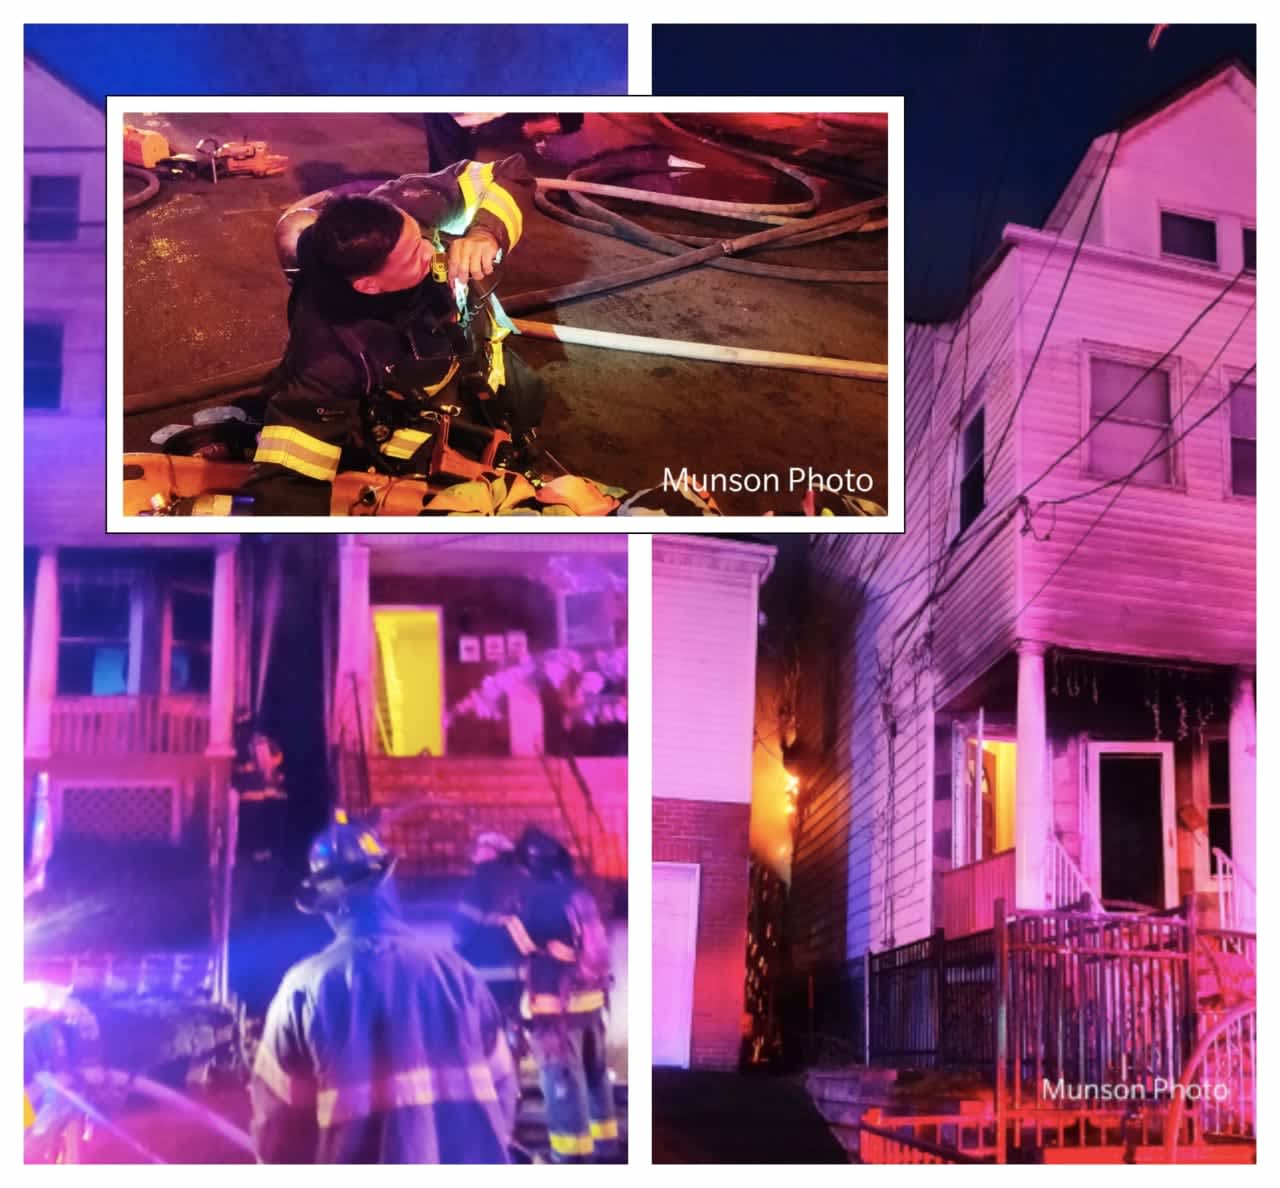 PHOTOS BY ROB MUNSON: Four families were displaced in a Sunday morning Newark fire, safety officials said.